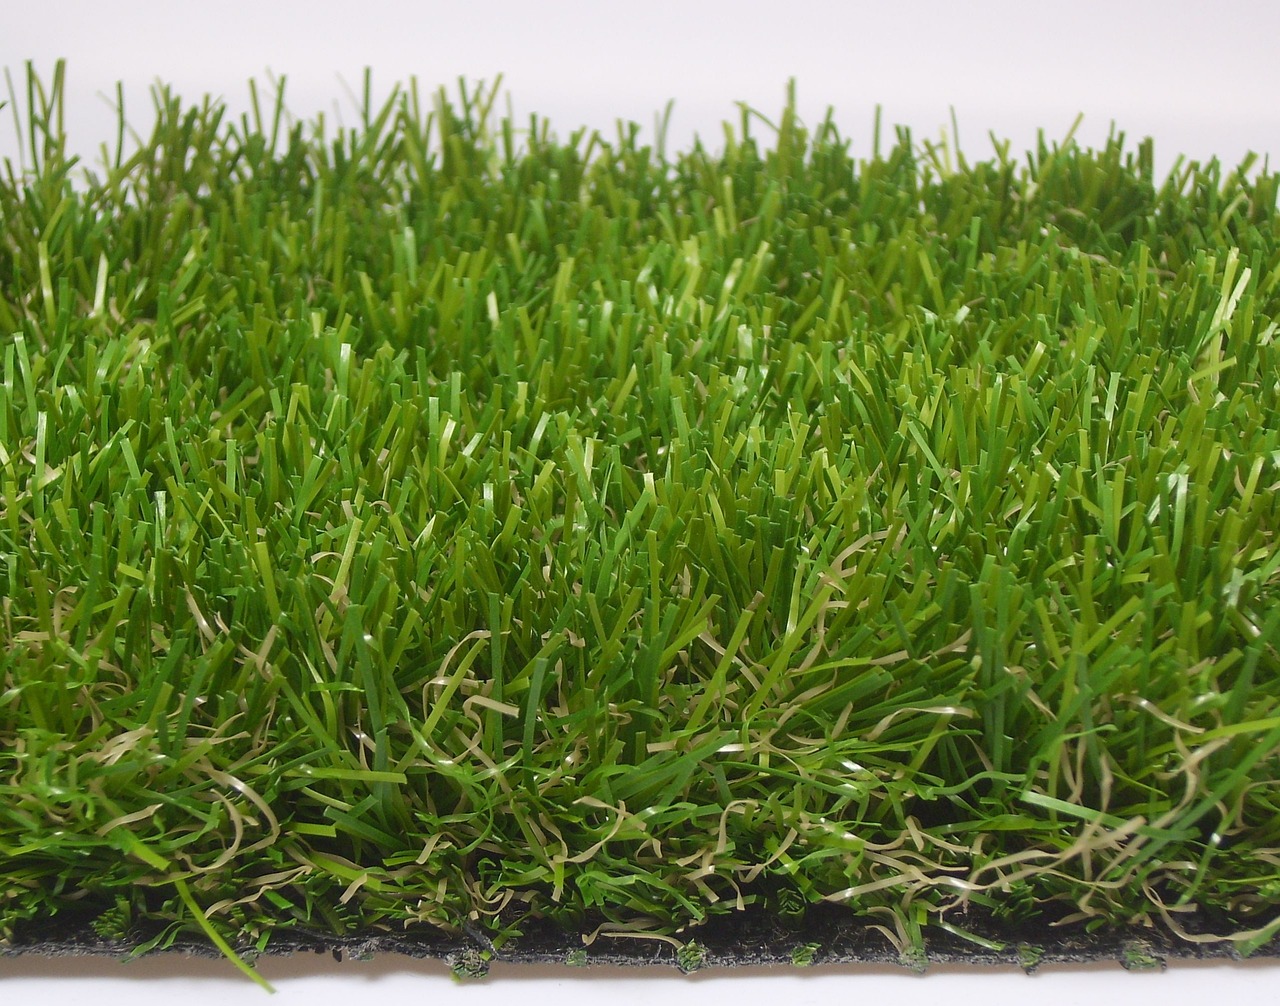 BENEFITS OF ARTIFICIAL TURF